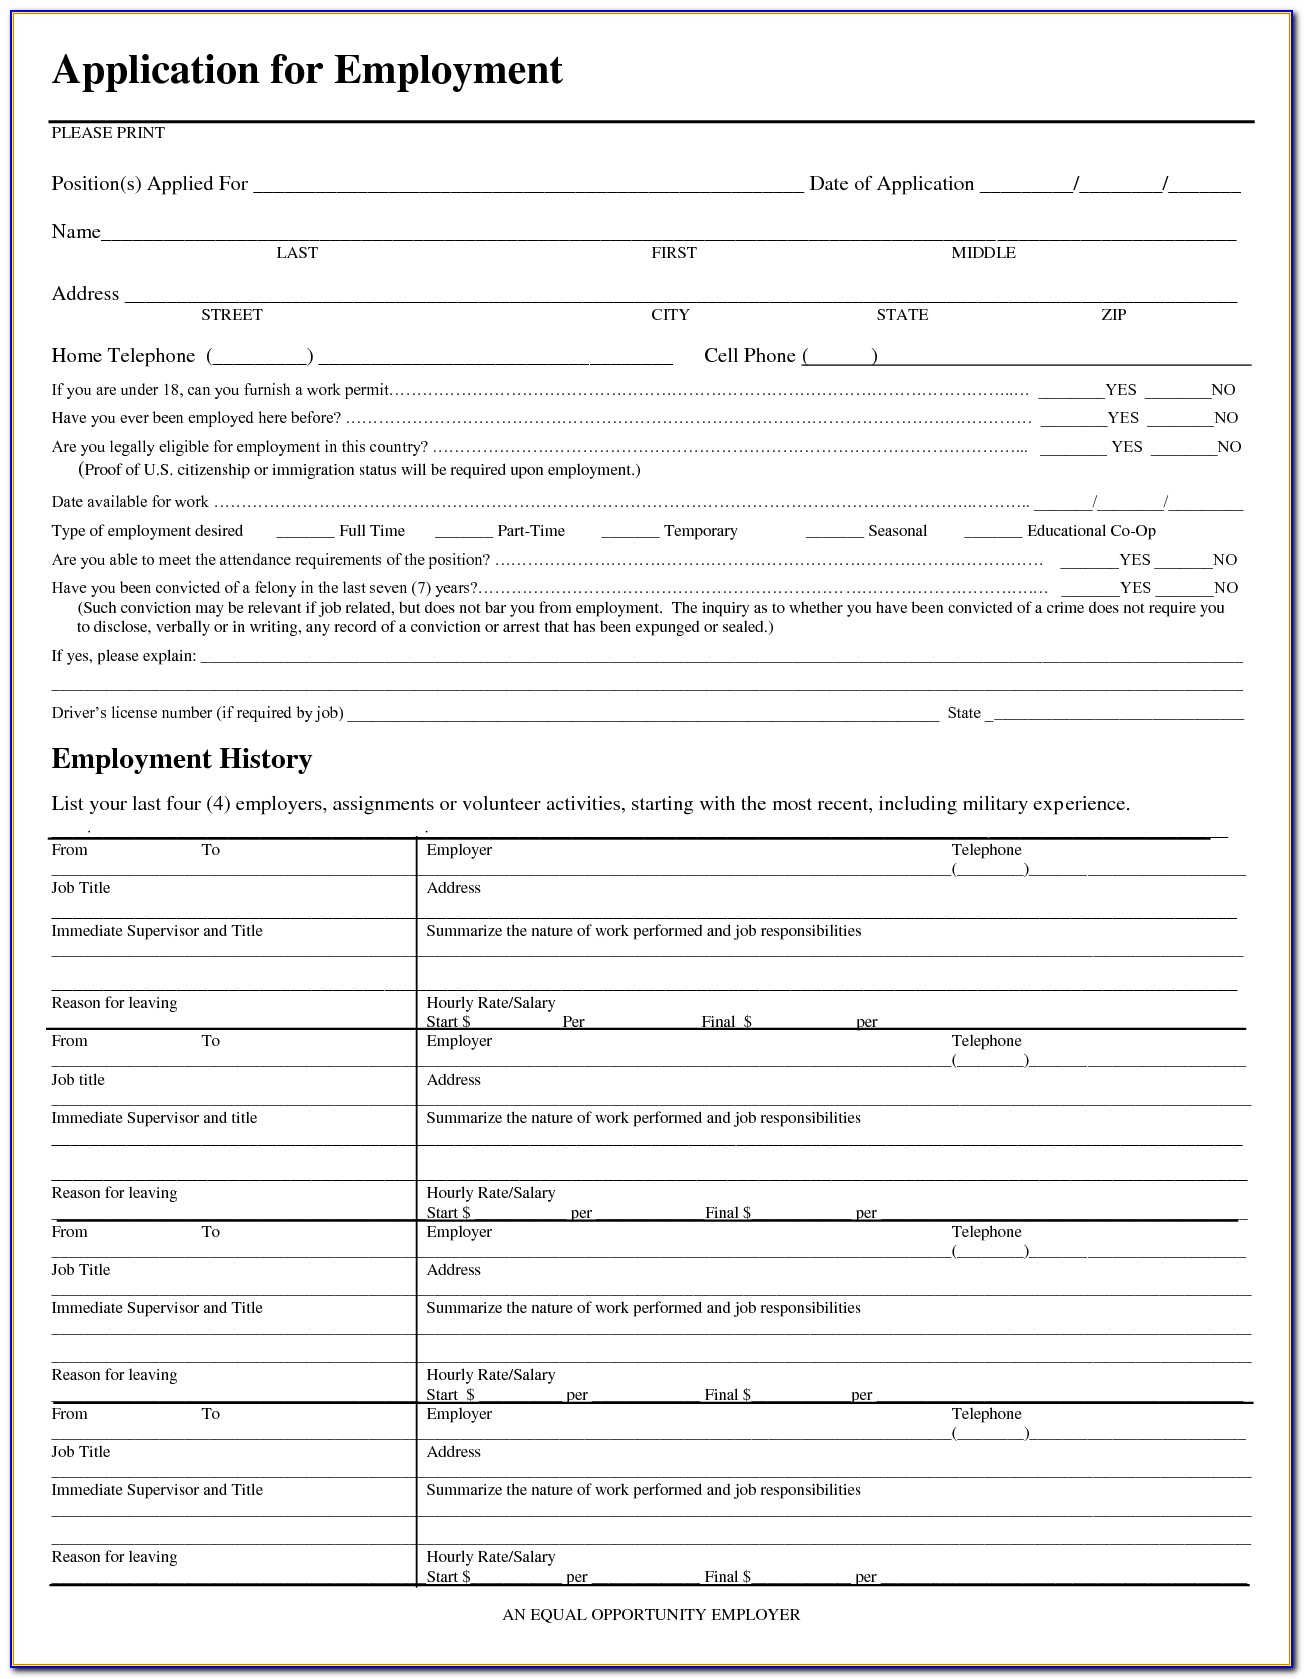 Employment Application Forms Free Printable